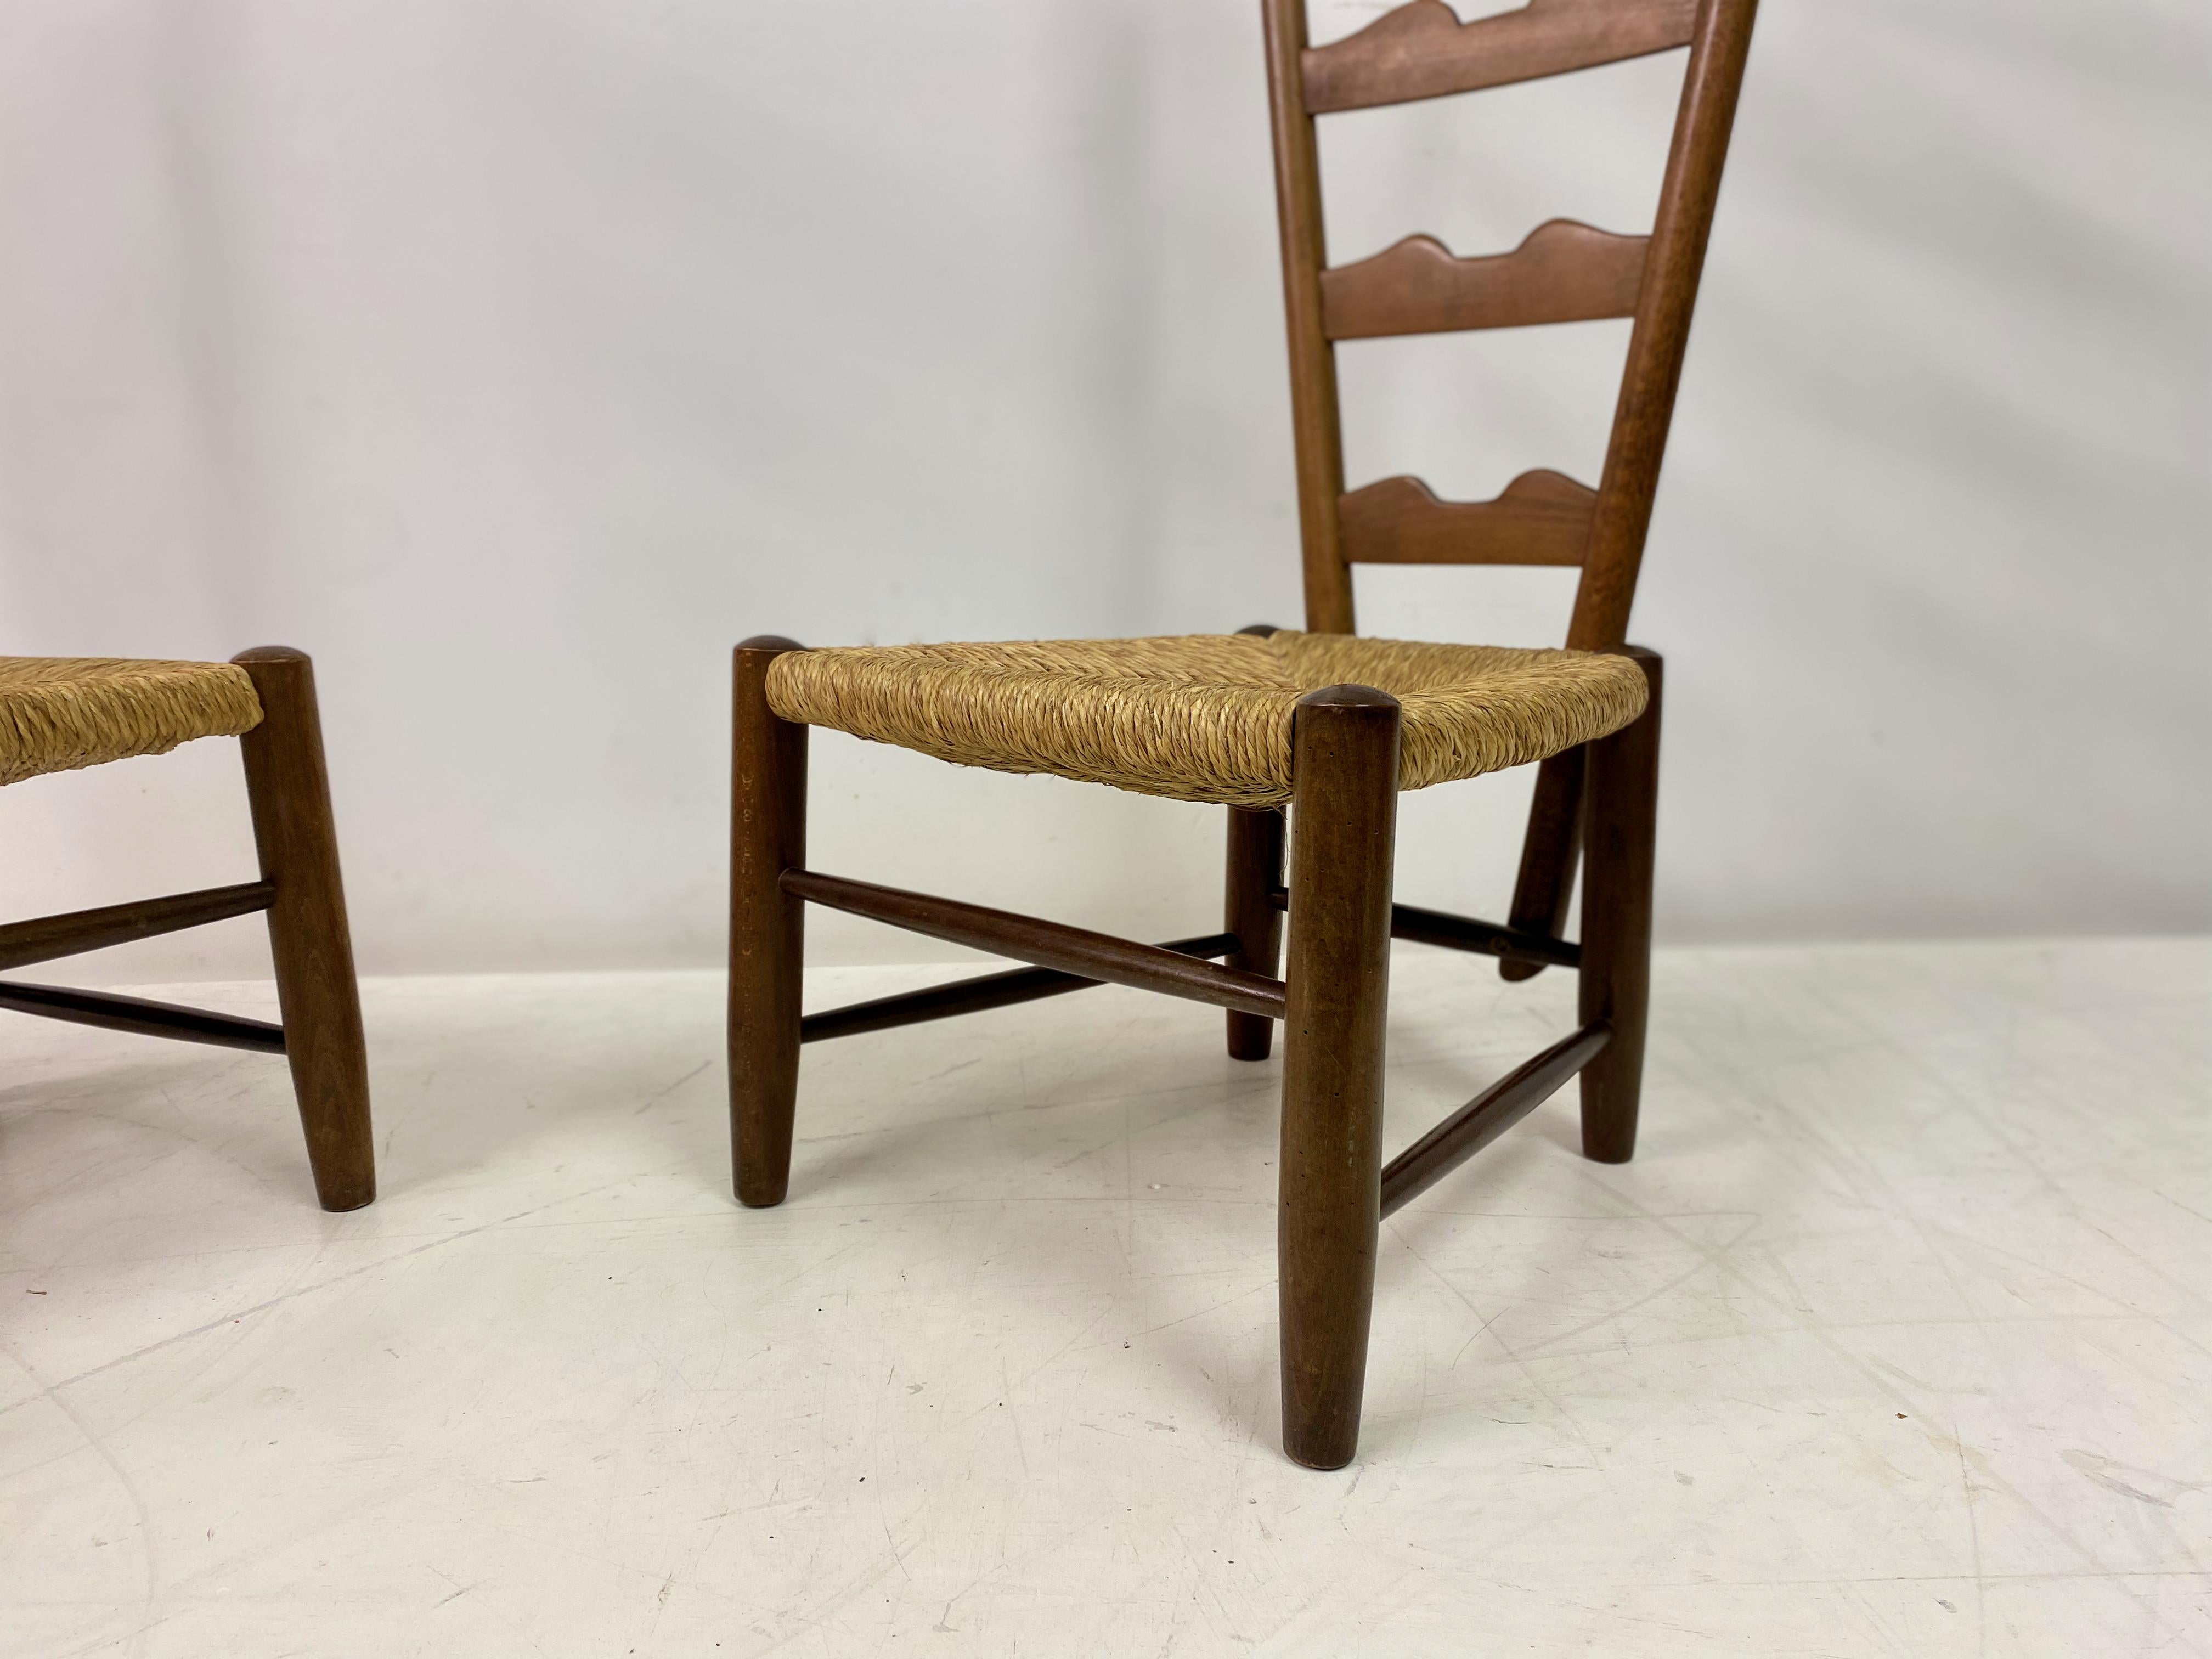 Pair Of Fireside Chairs By Gio Ponti For Casa E Giardino In Good Condition For Sale In London, London